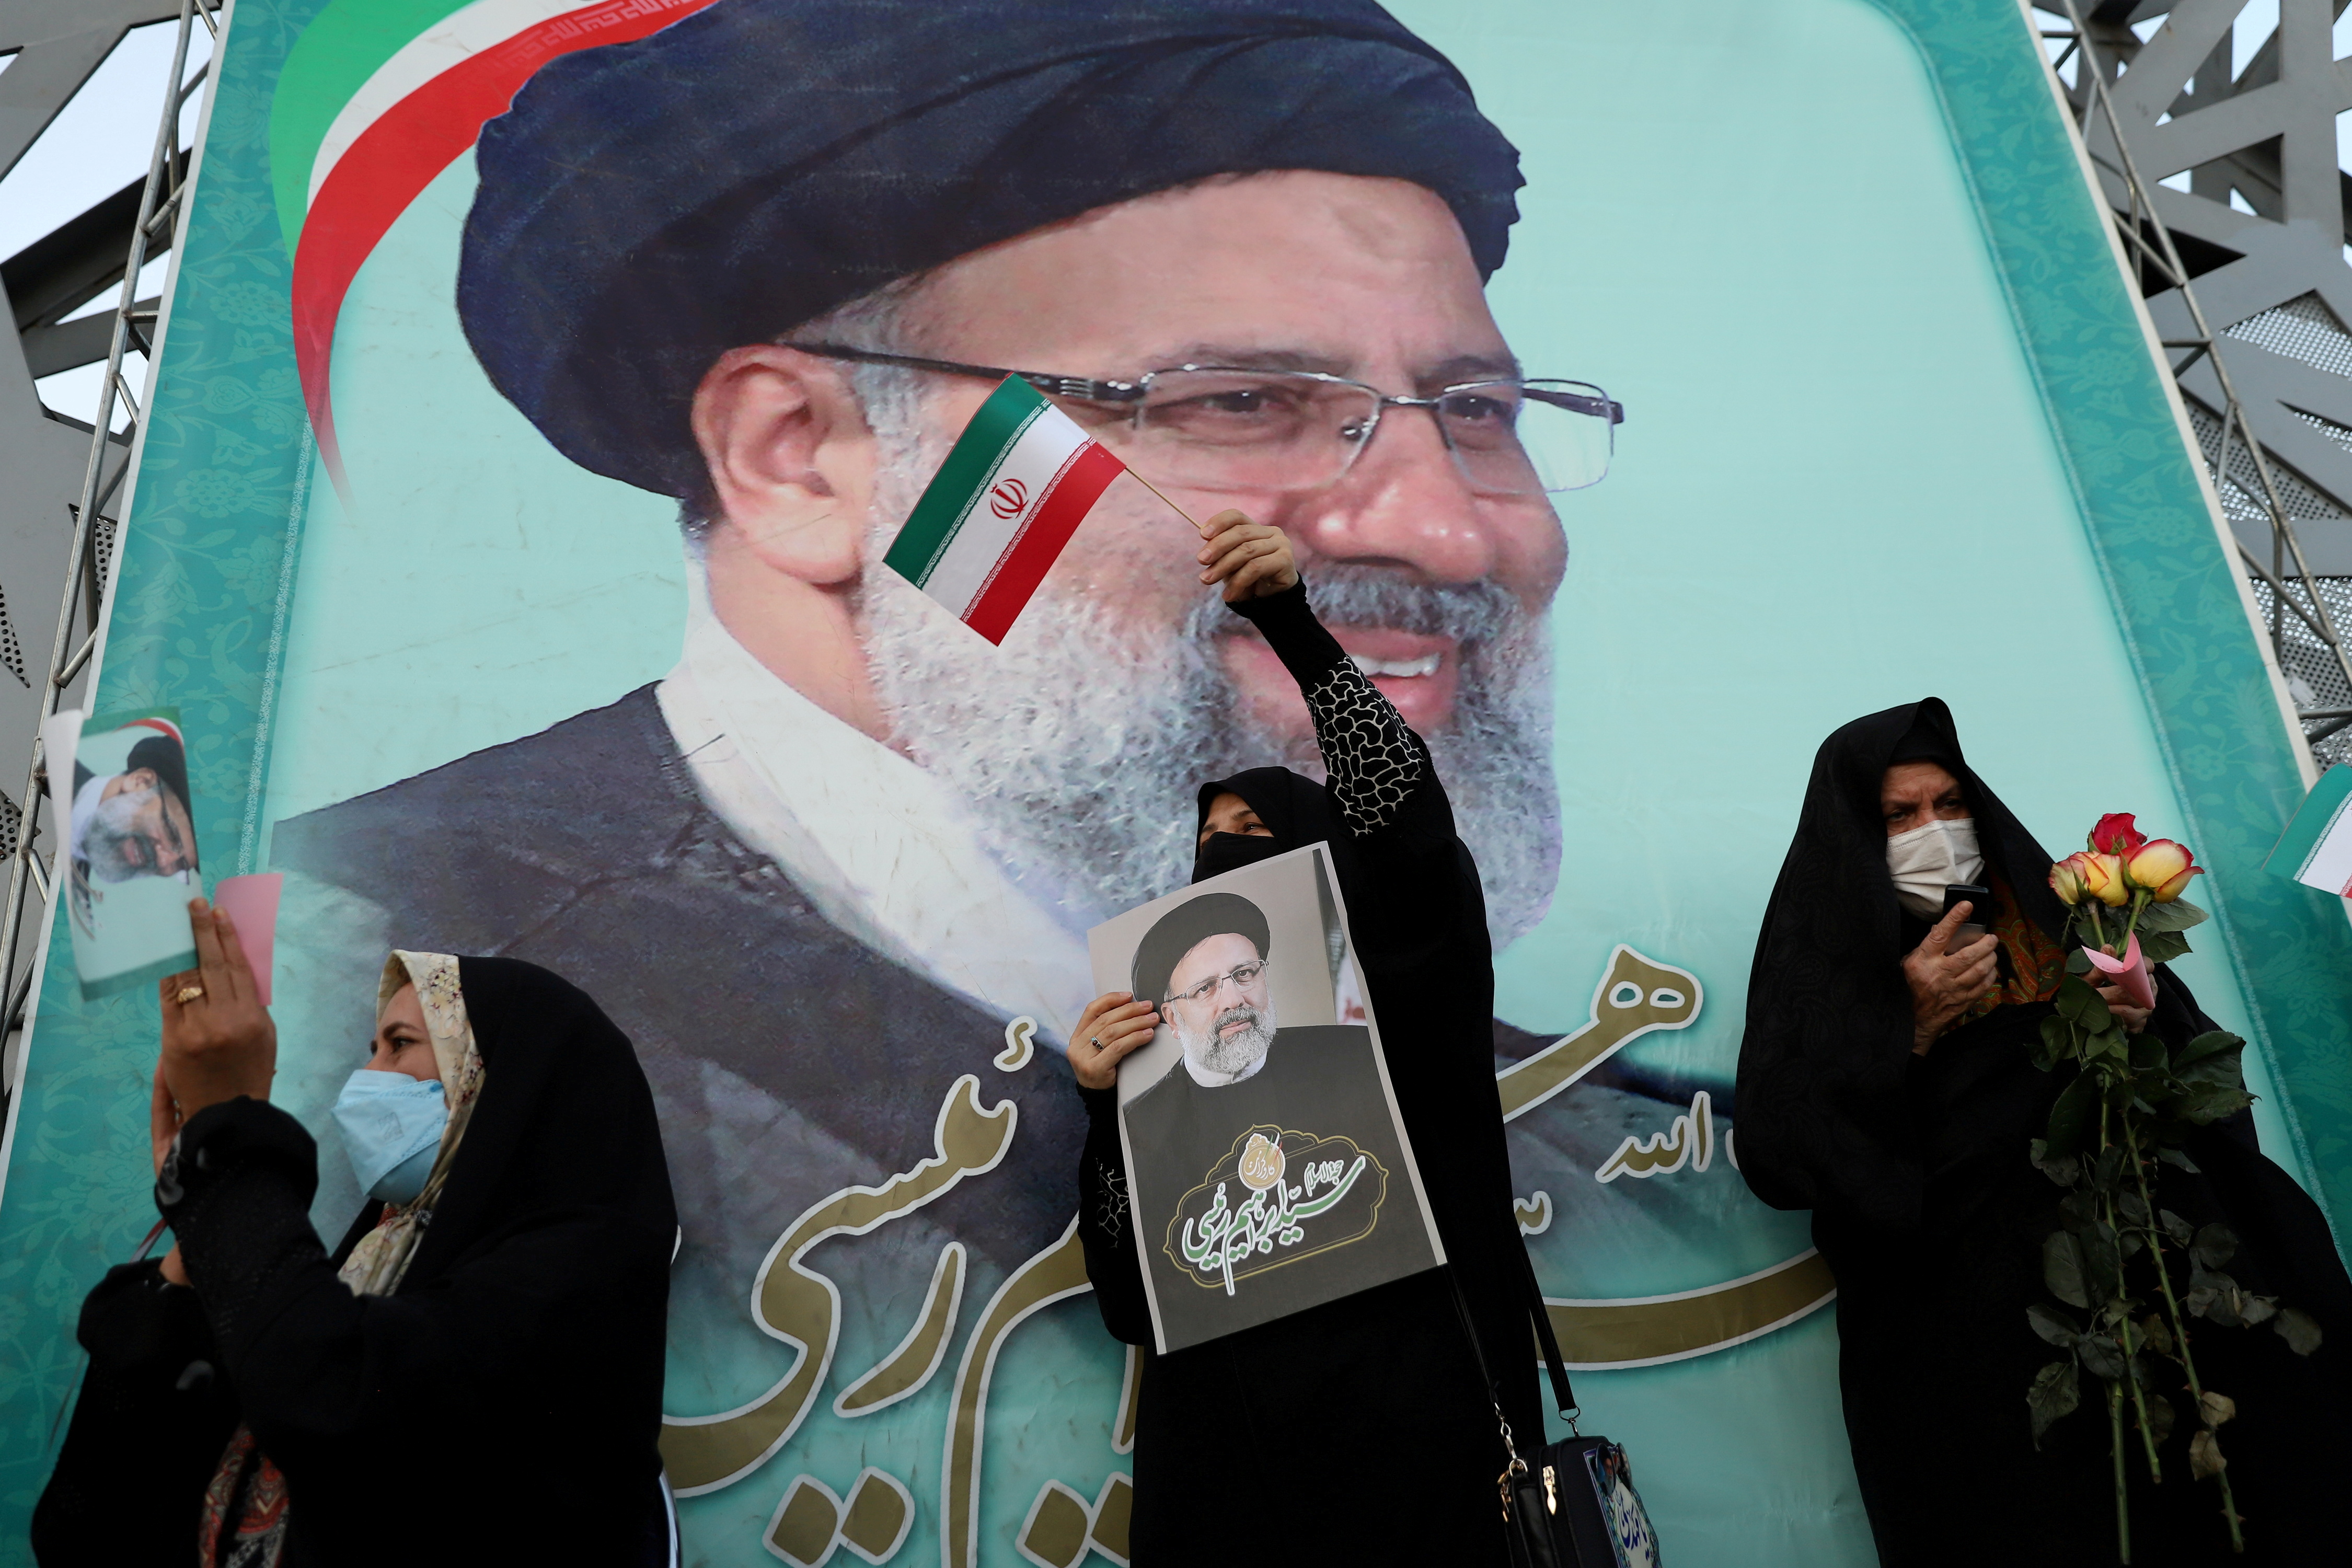 A supporter of Ebrahim Raisi displays his portrait during a celebratory rally for his presidential election victory in Tehran, Iran June 19, 2021. Majid Asgaripour/WANA (West Asia News Agency) via REUTERS  